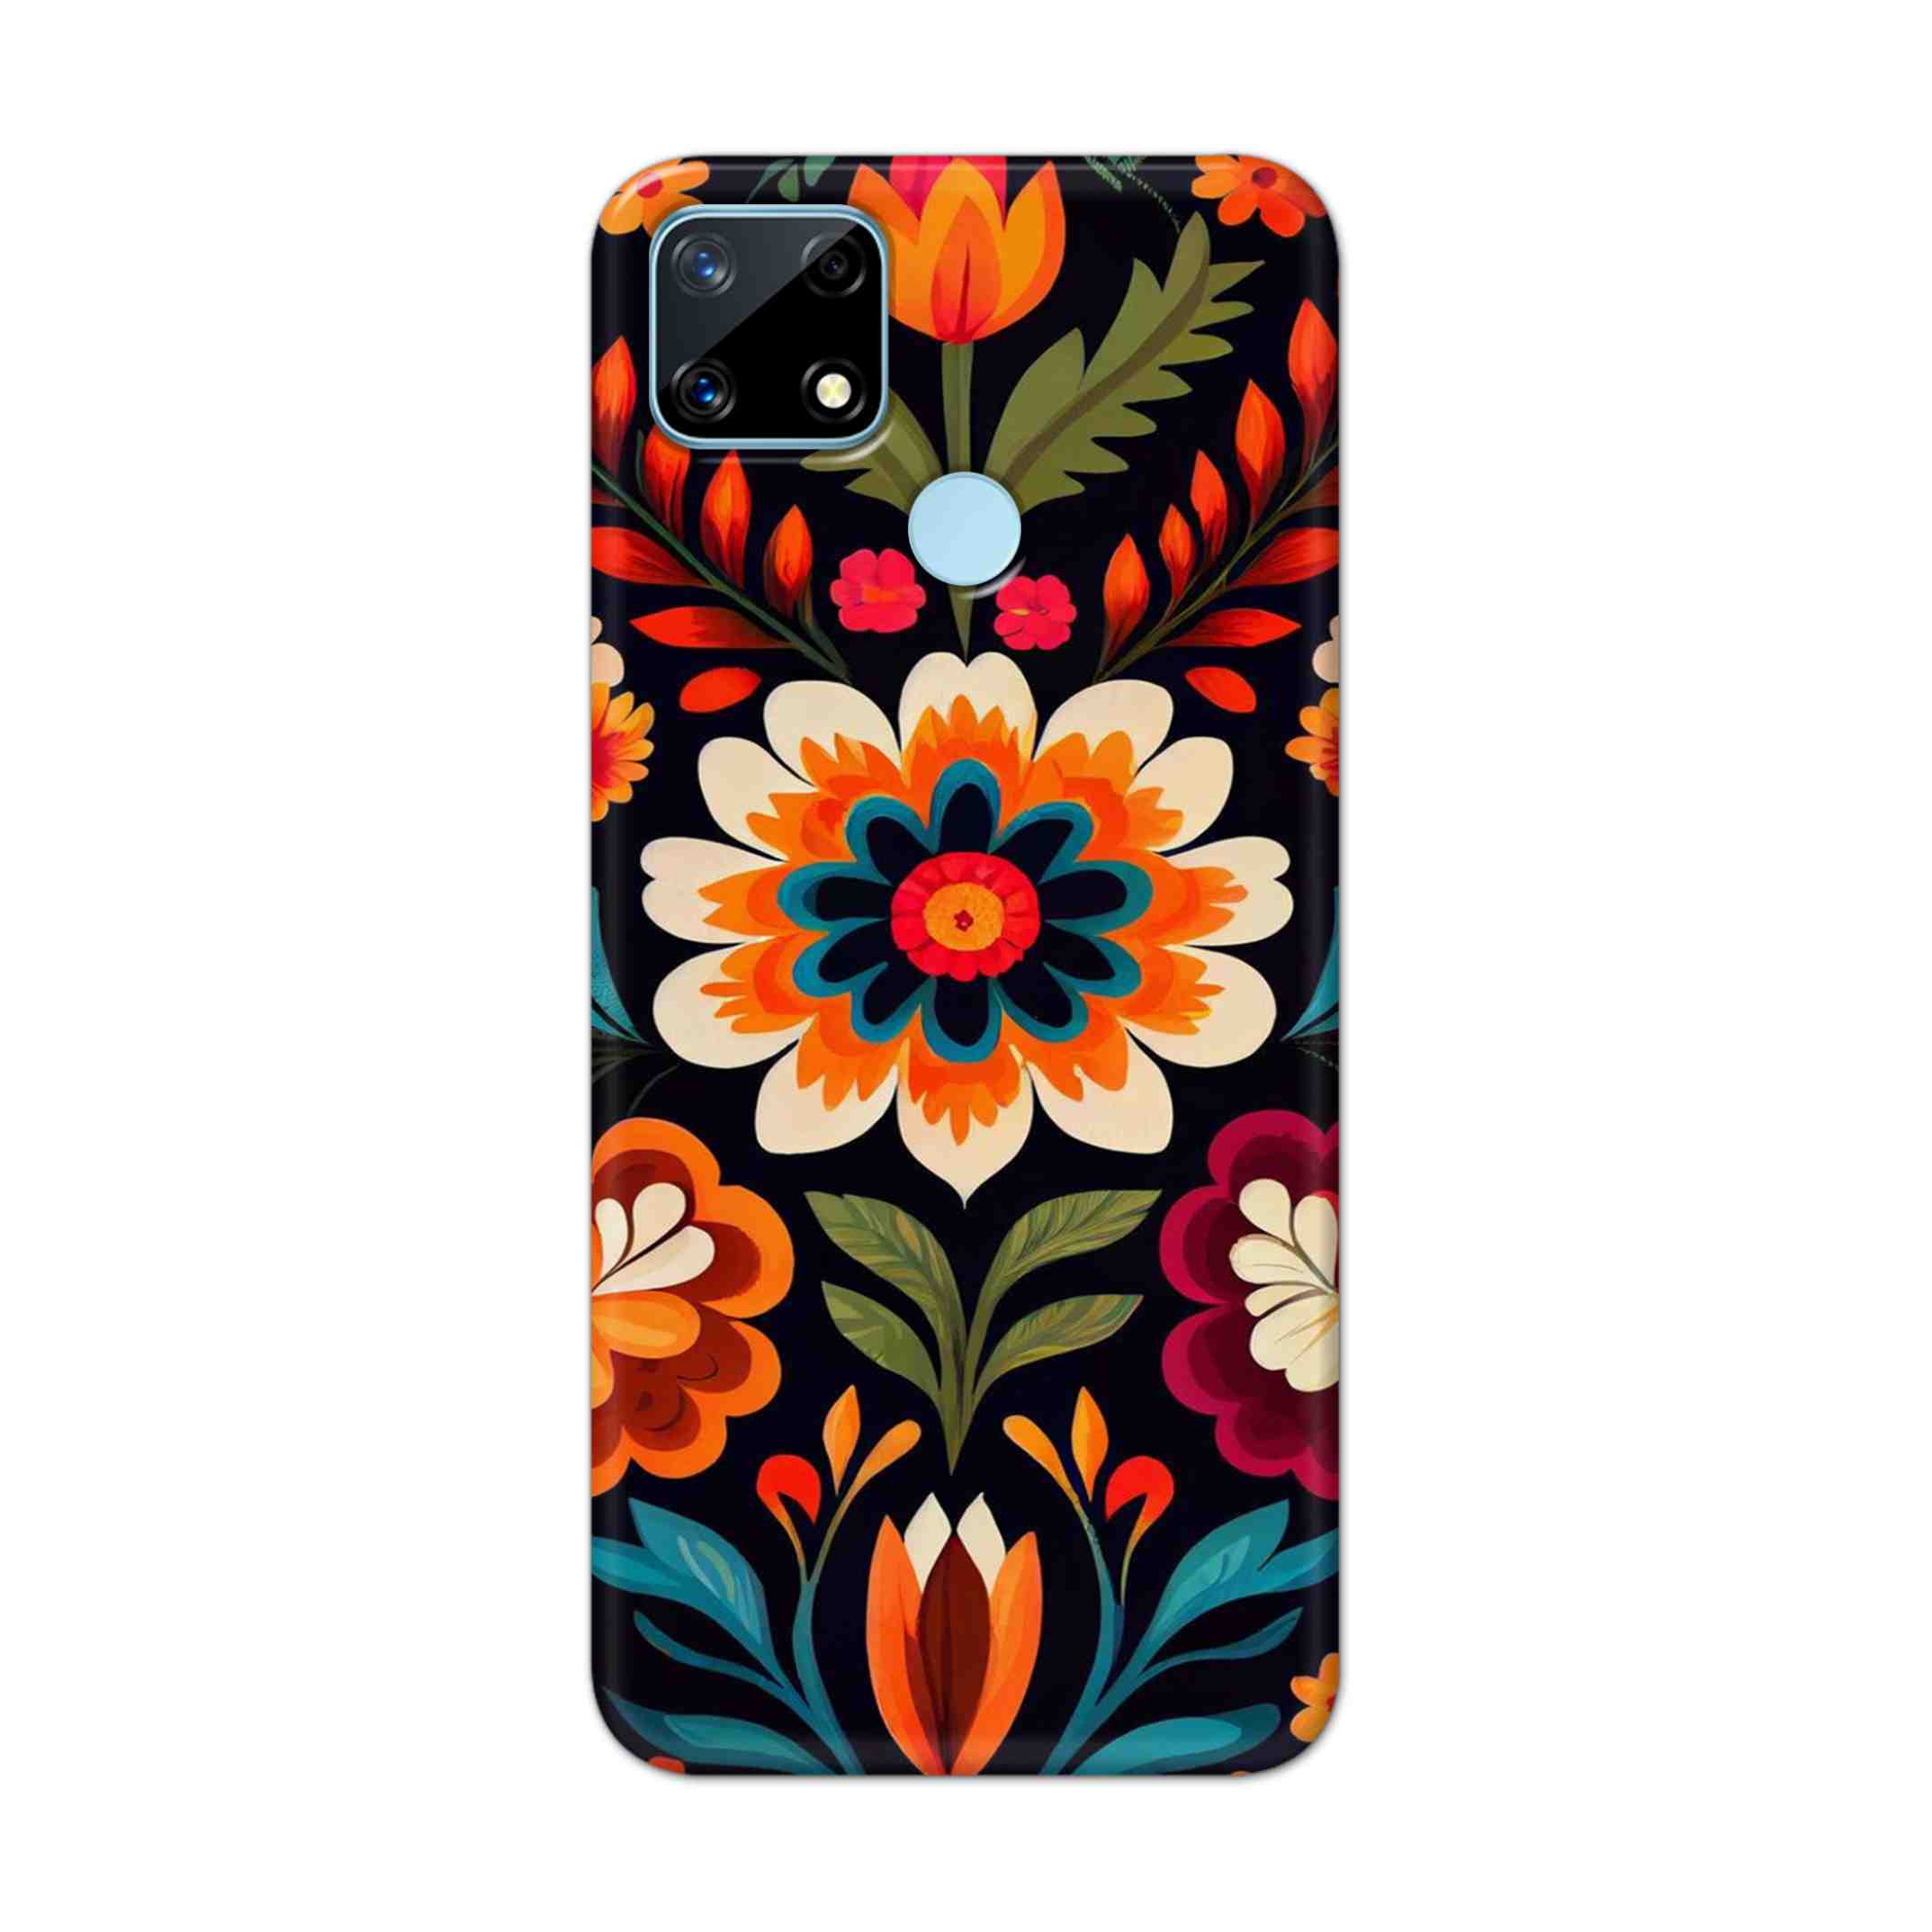 Buy Flower Hard Back Mobile Phone Case Cover For Realme Narzo 20 Online